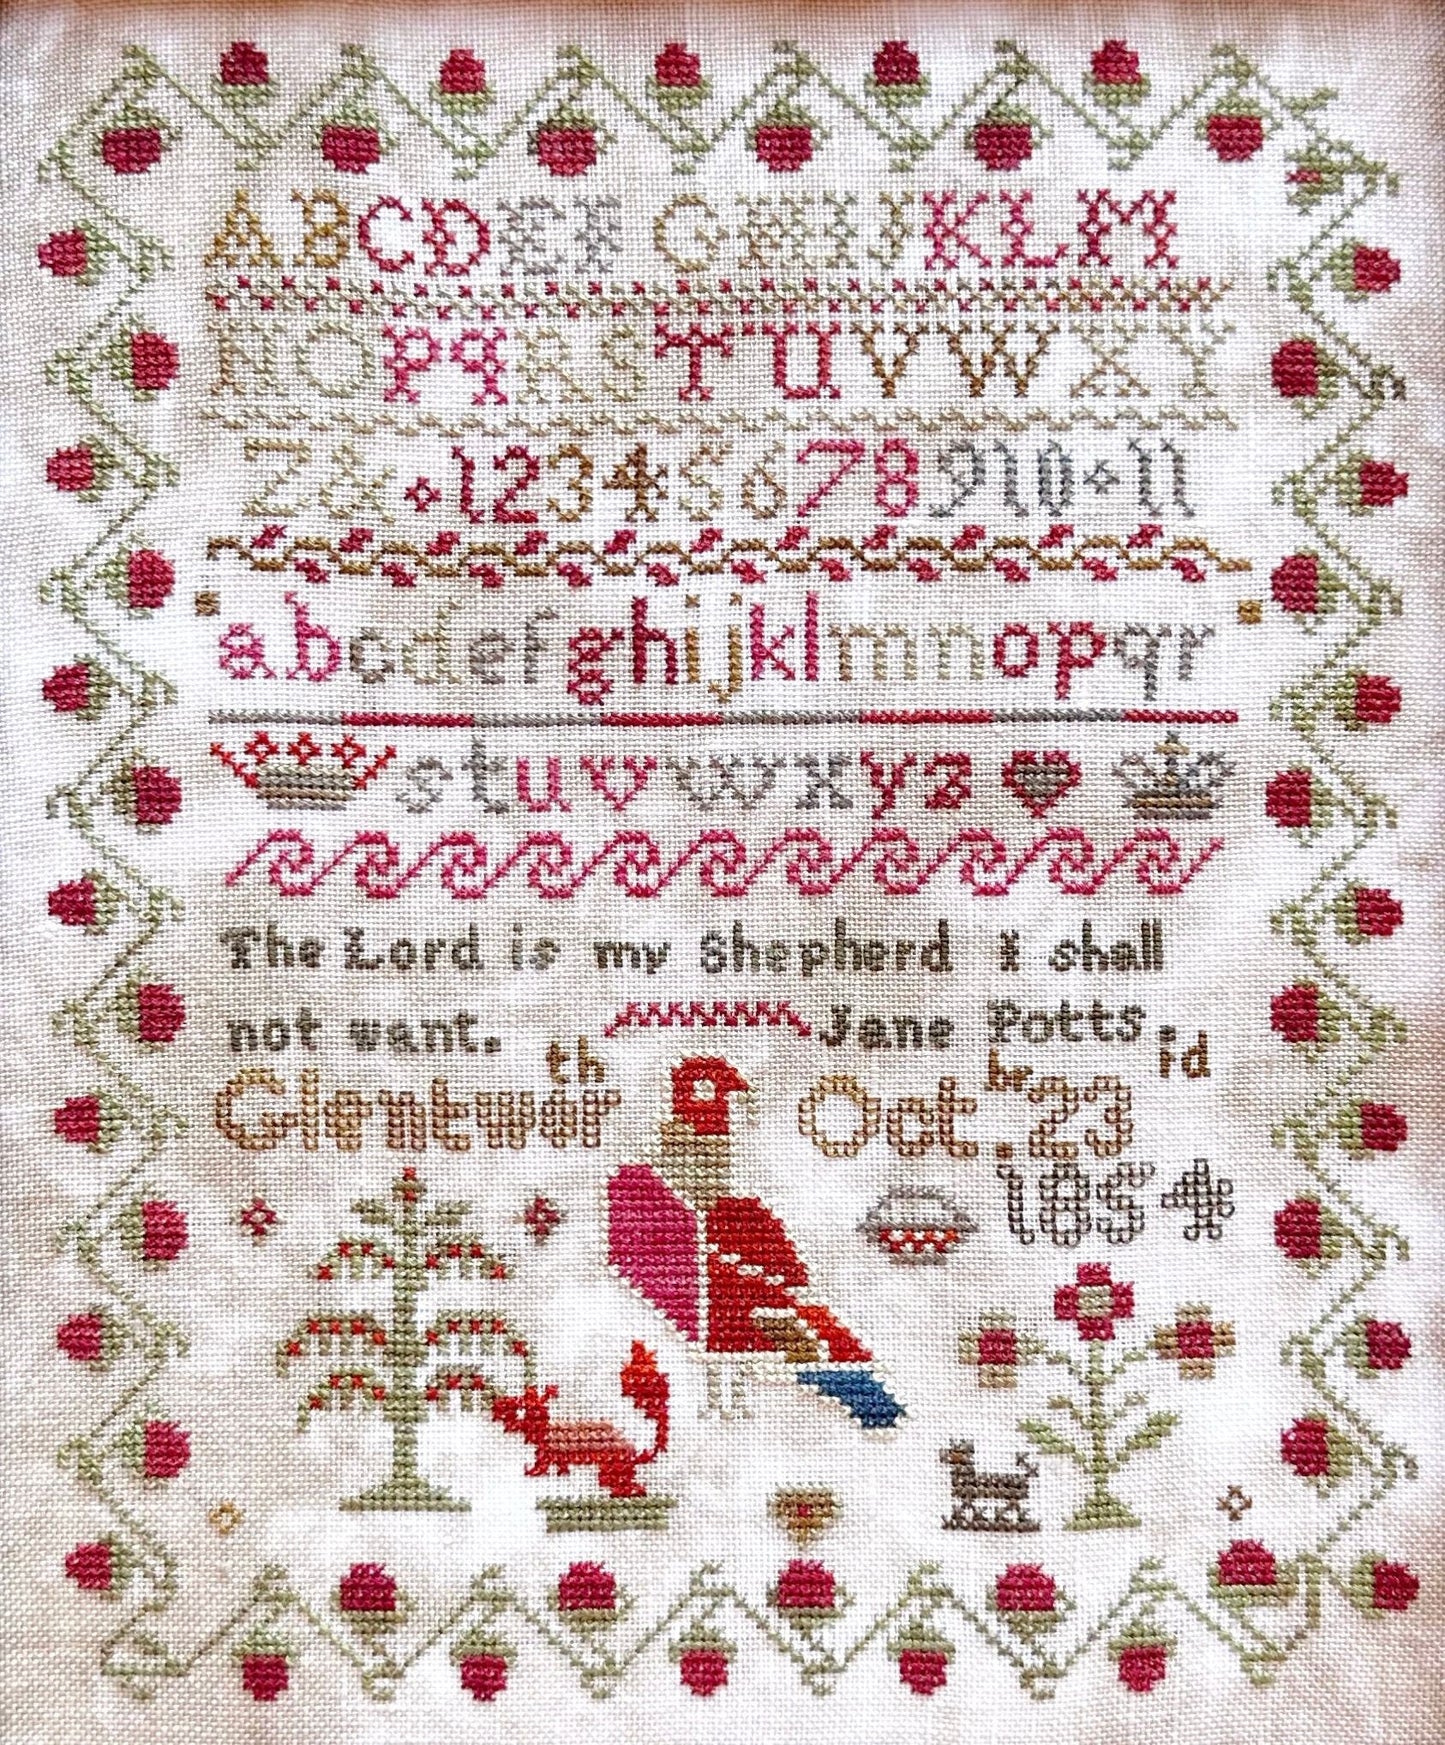 Jane Potts 1854 - Cross Stitch Chart by Lucy Beam PREORDER